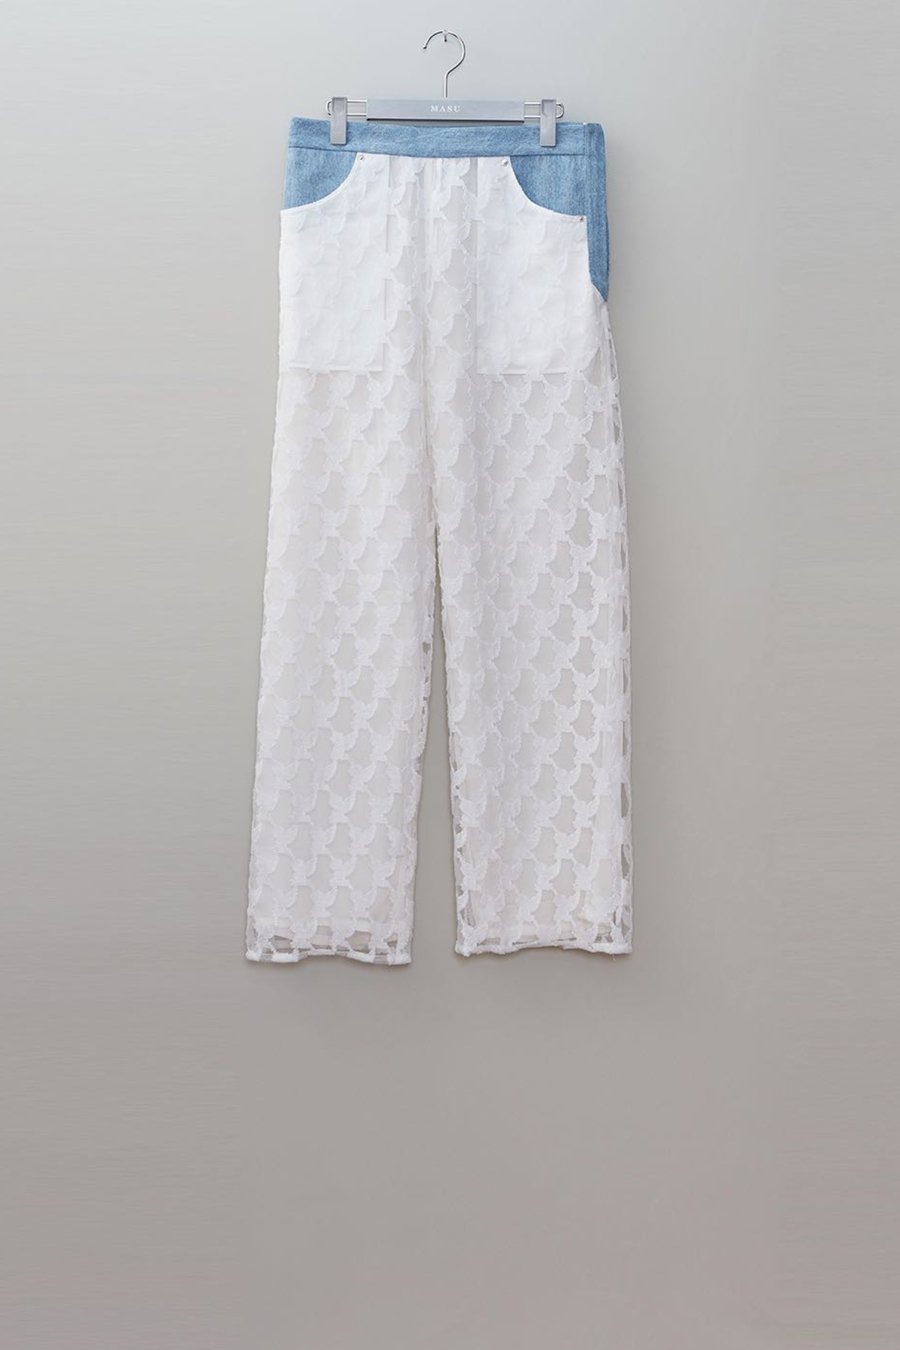 MASU  ANGEL LACE JEANS(WHITE)<img class='new_mark_img2' src='https://img.shop-pro.jp/img/new/icons15.gif' style='border:none;display:inline;margin:0px;padding:0px;width:auto;' />